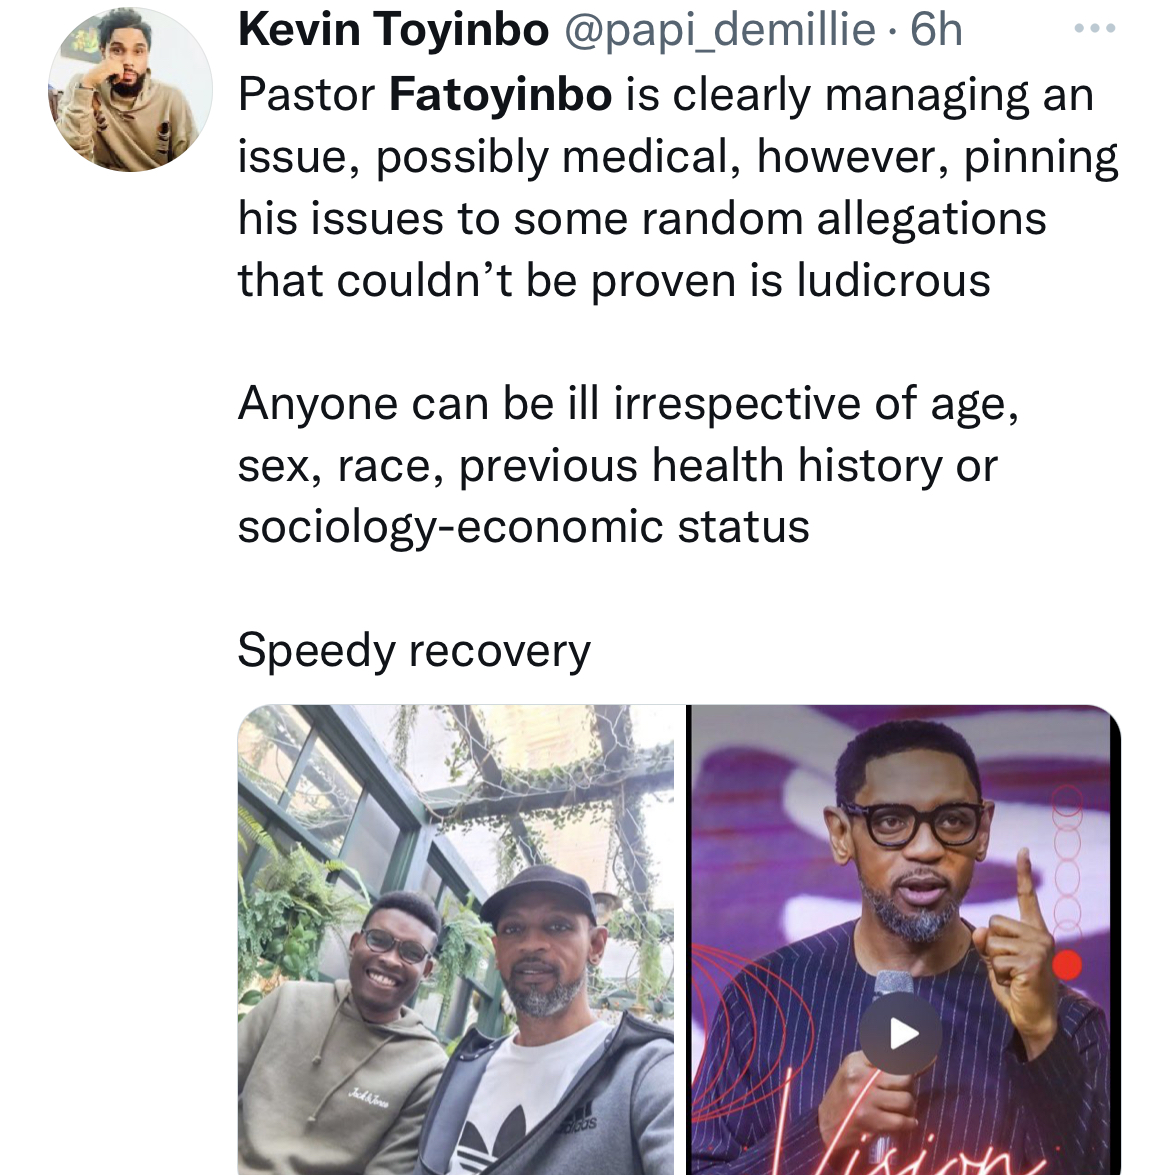 Concerns over Health of Coza Pastor as new look of Biodun fatoyinbo emerge [photos]